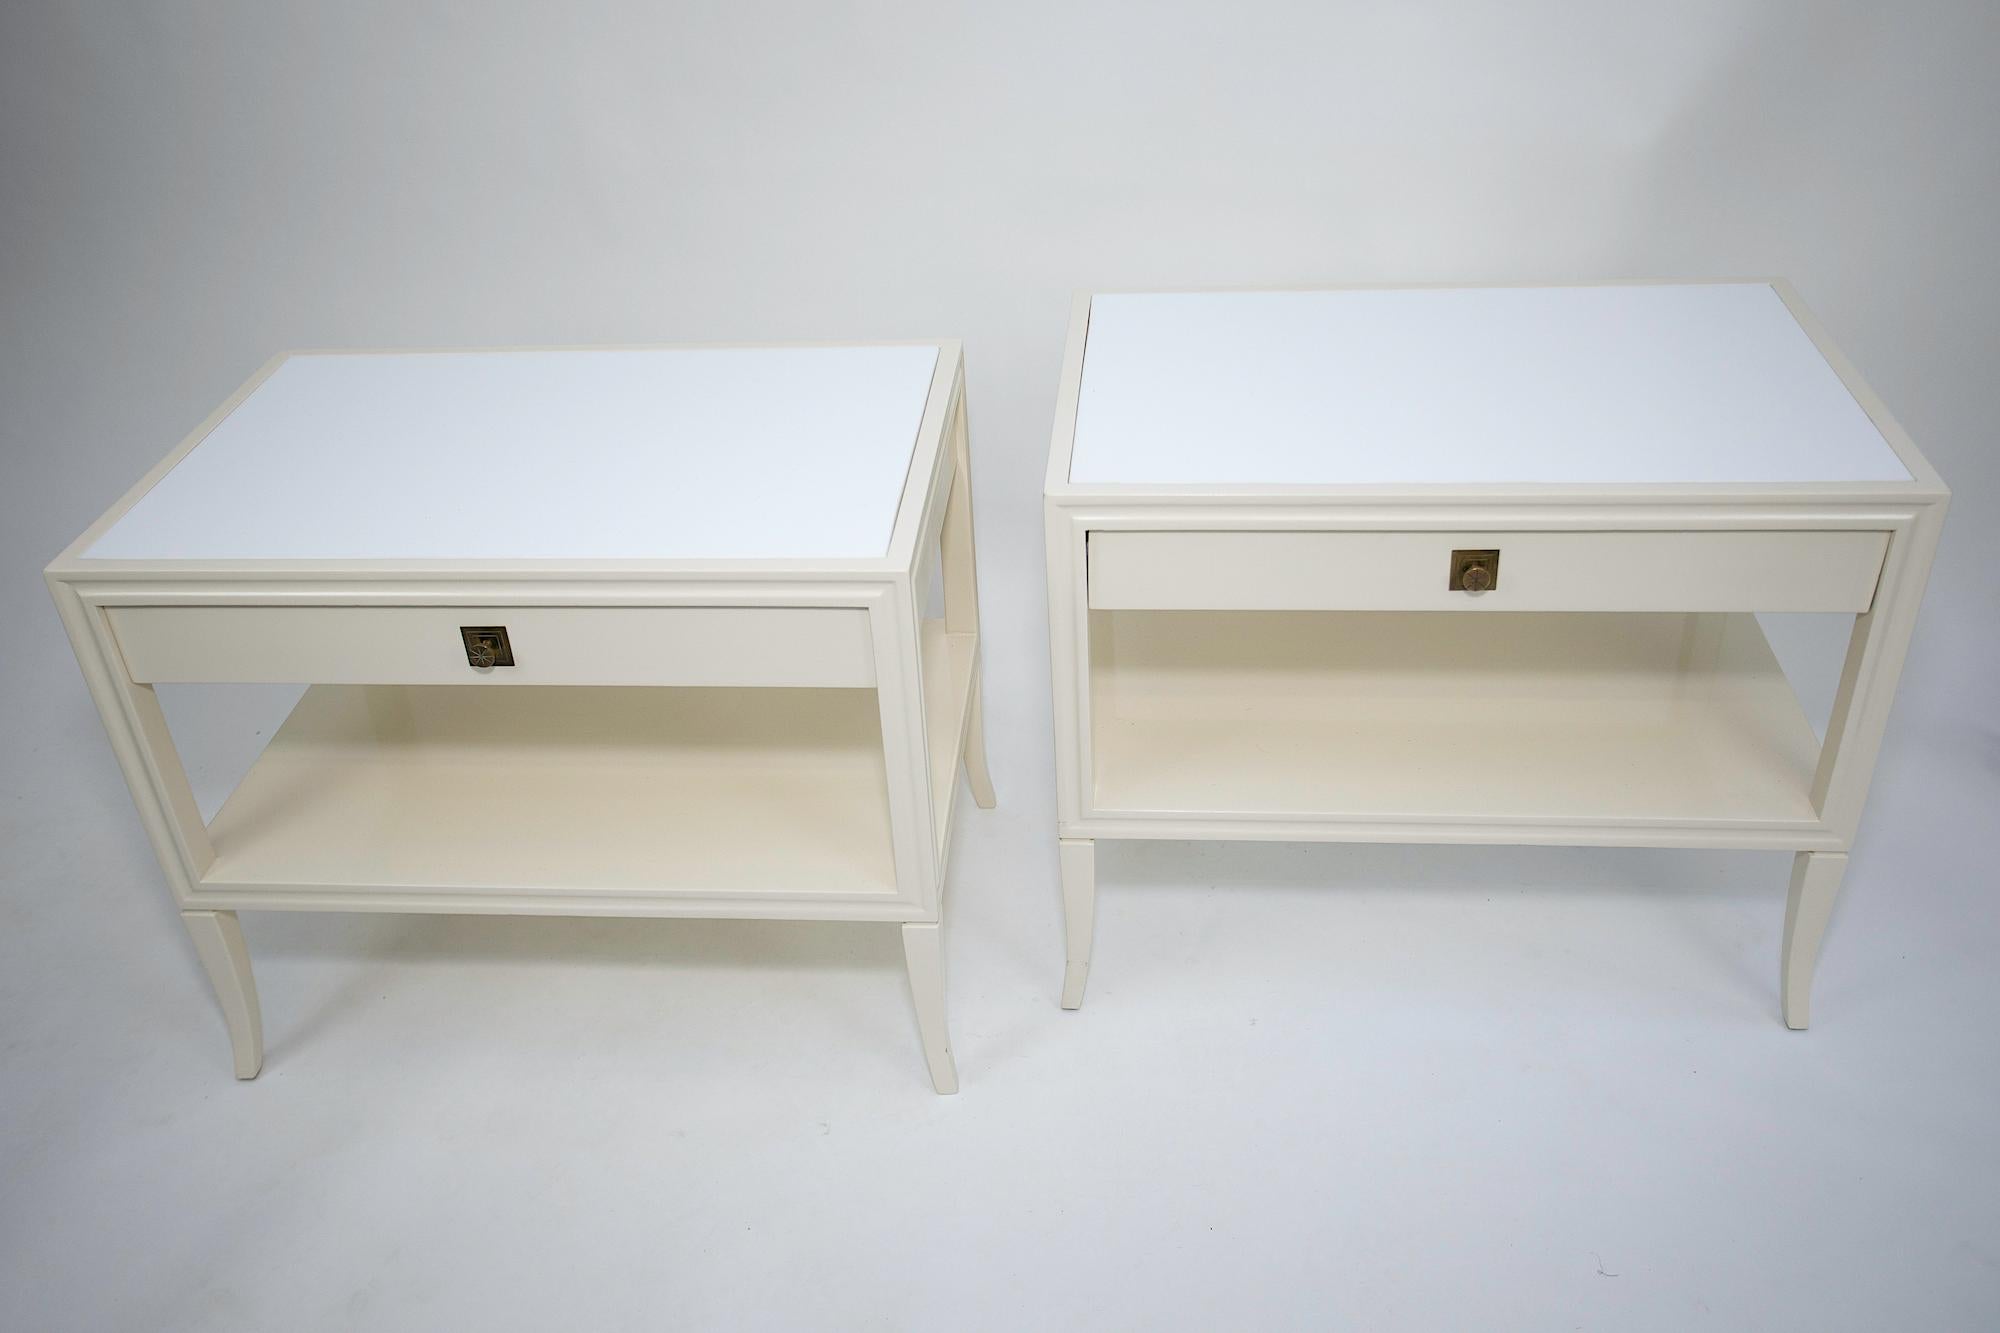 A pair of Tommi Parzinger End Tables for Parzinger Originals.
Lacquered wood Architectural white glass tops and Brass engraved Drawer Pulls.
Refinished and Re-Glazed original surface.